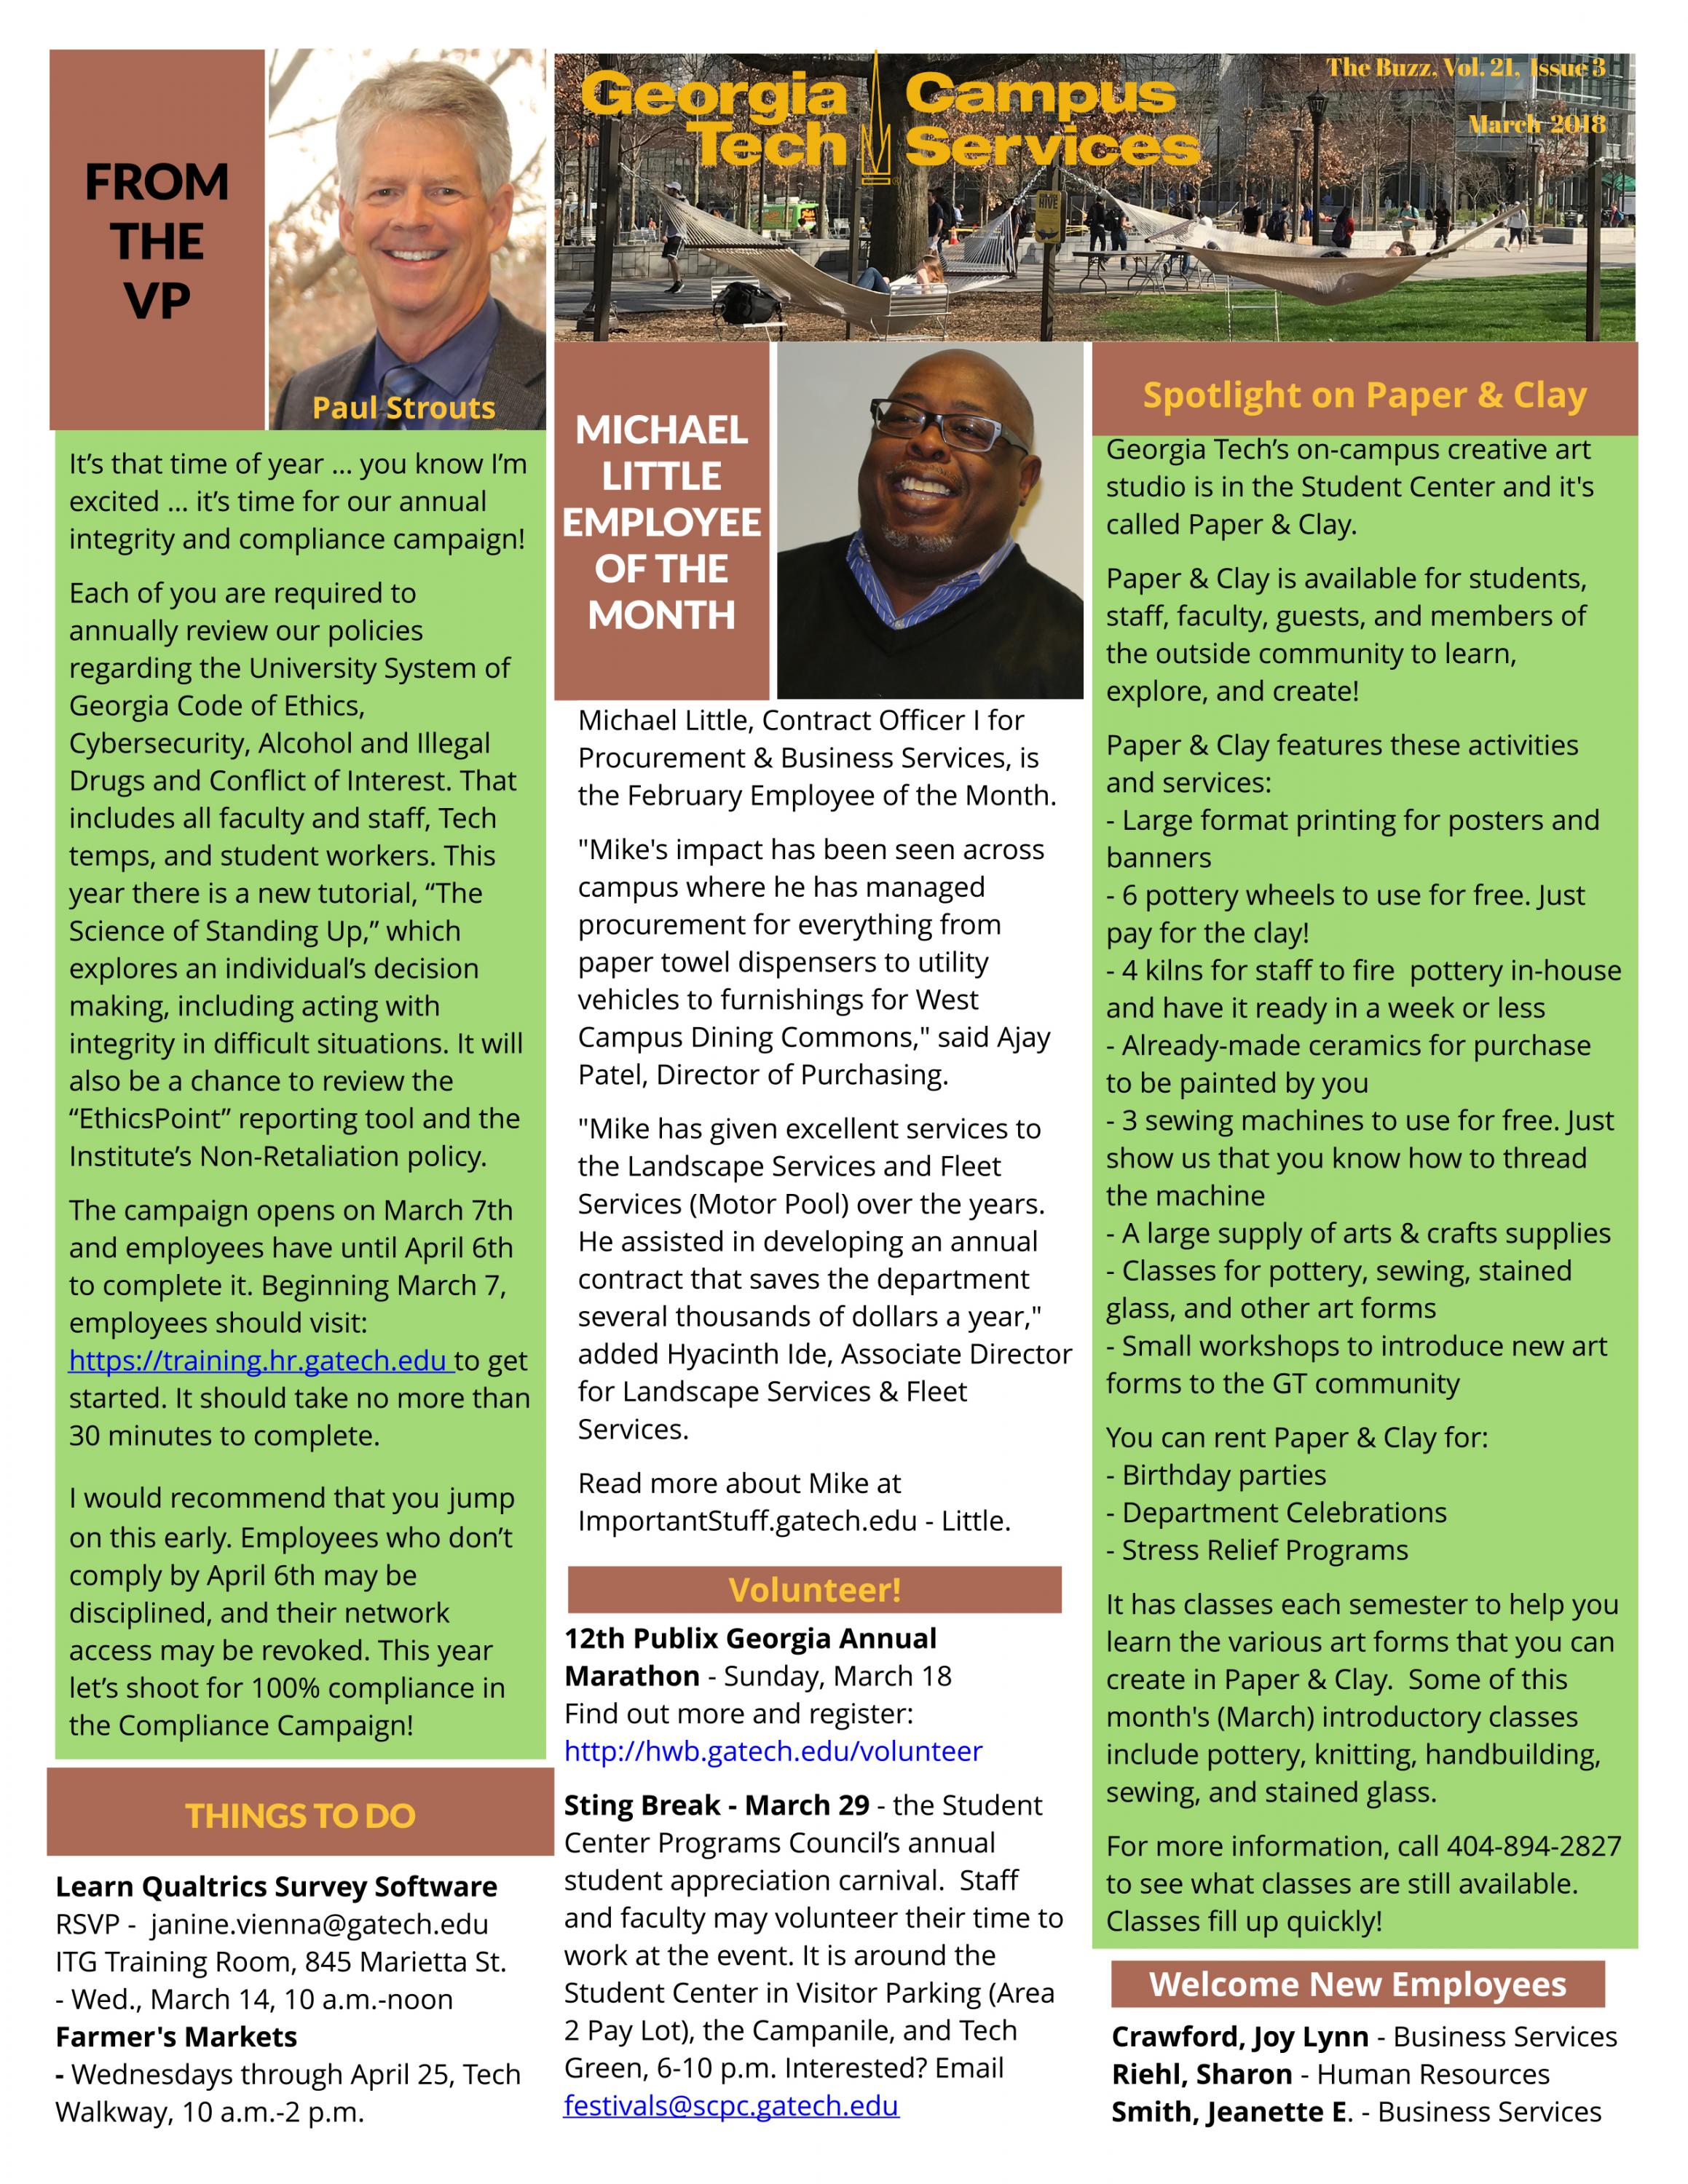 Picture of the March 2018 Campus Services Newsletter